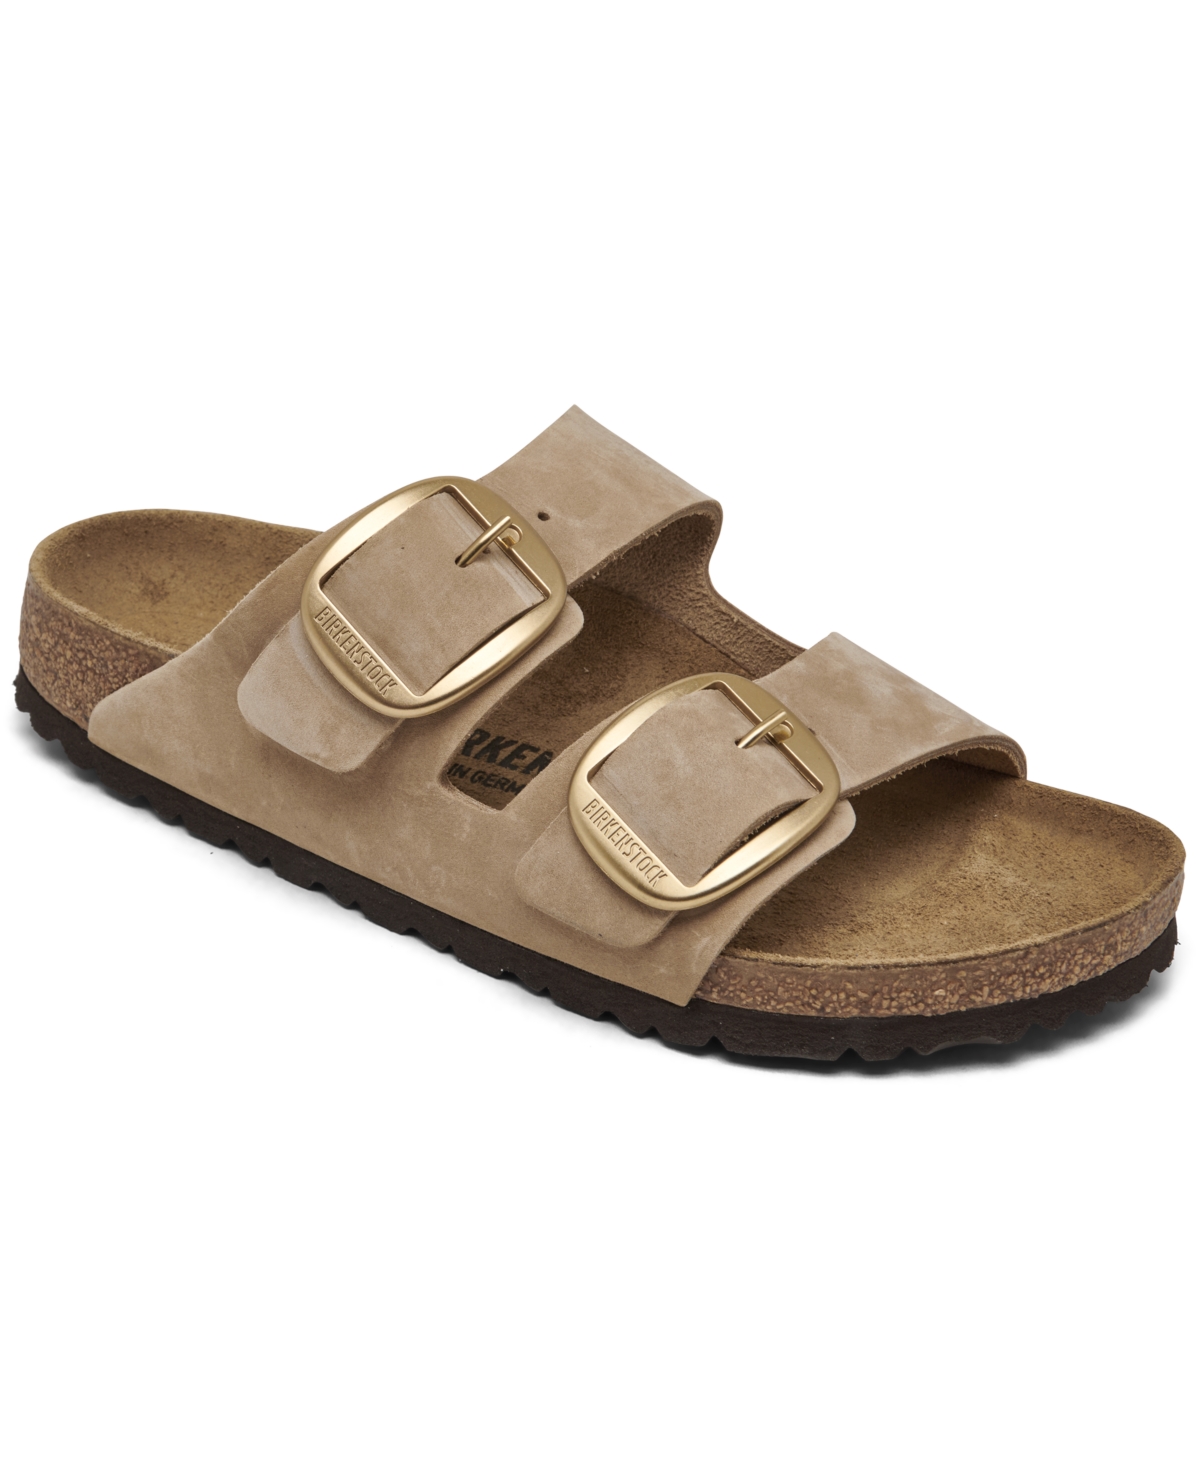 Women's Arizona Big Buckle Oiled Leather Sandals from Finish Line - Beige